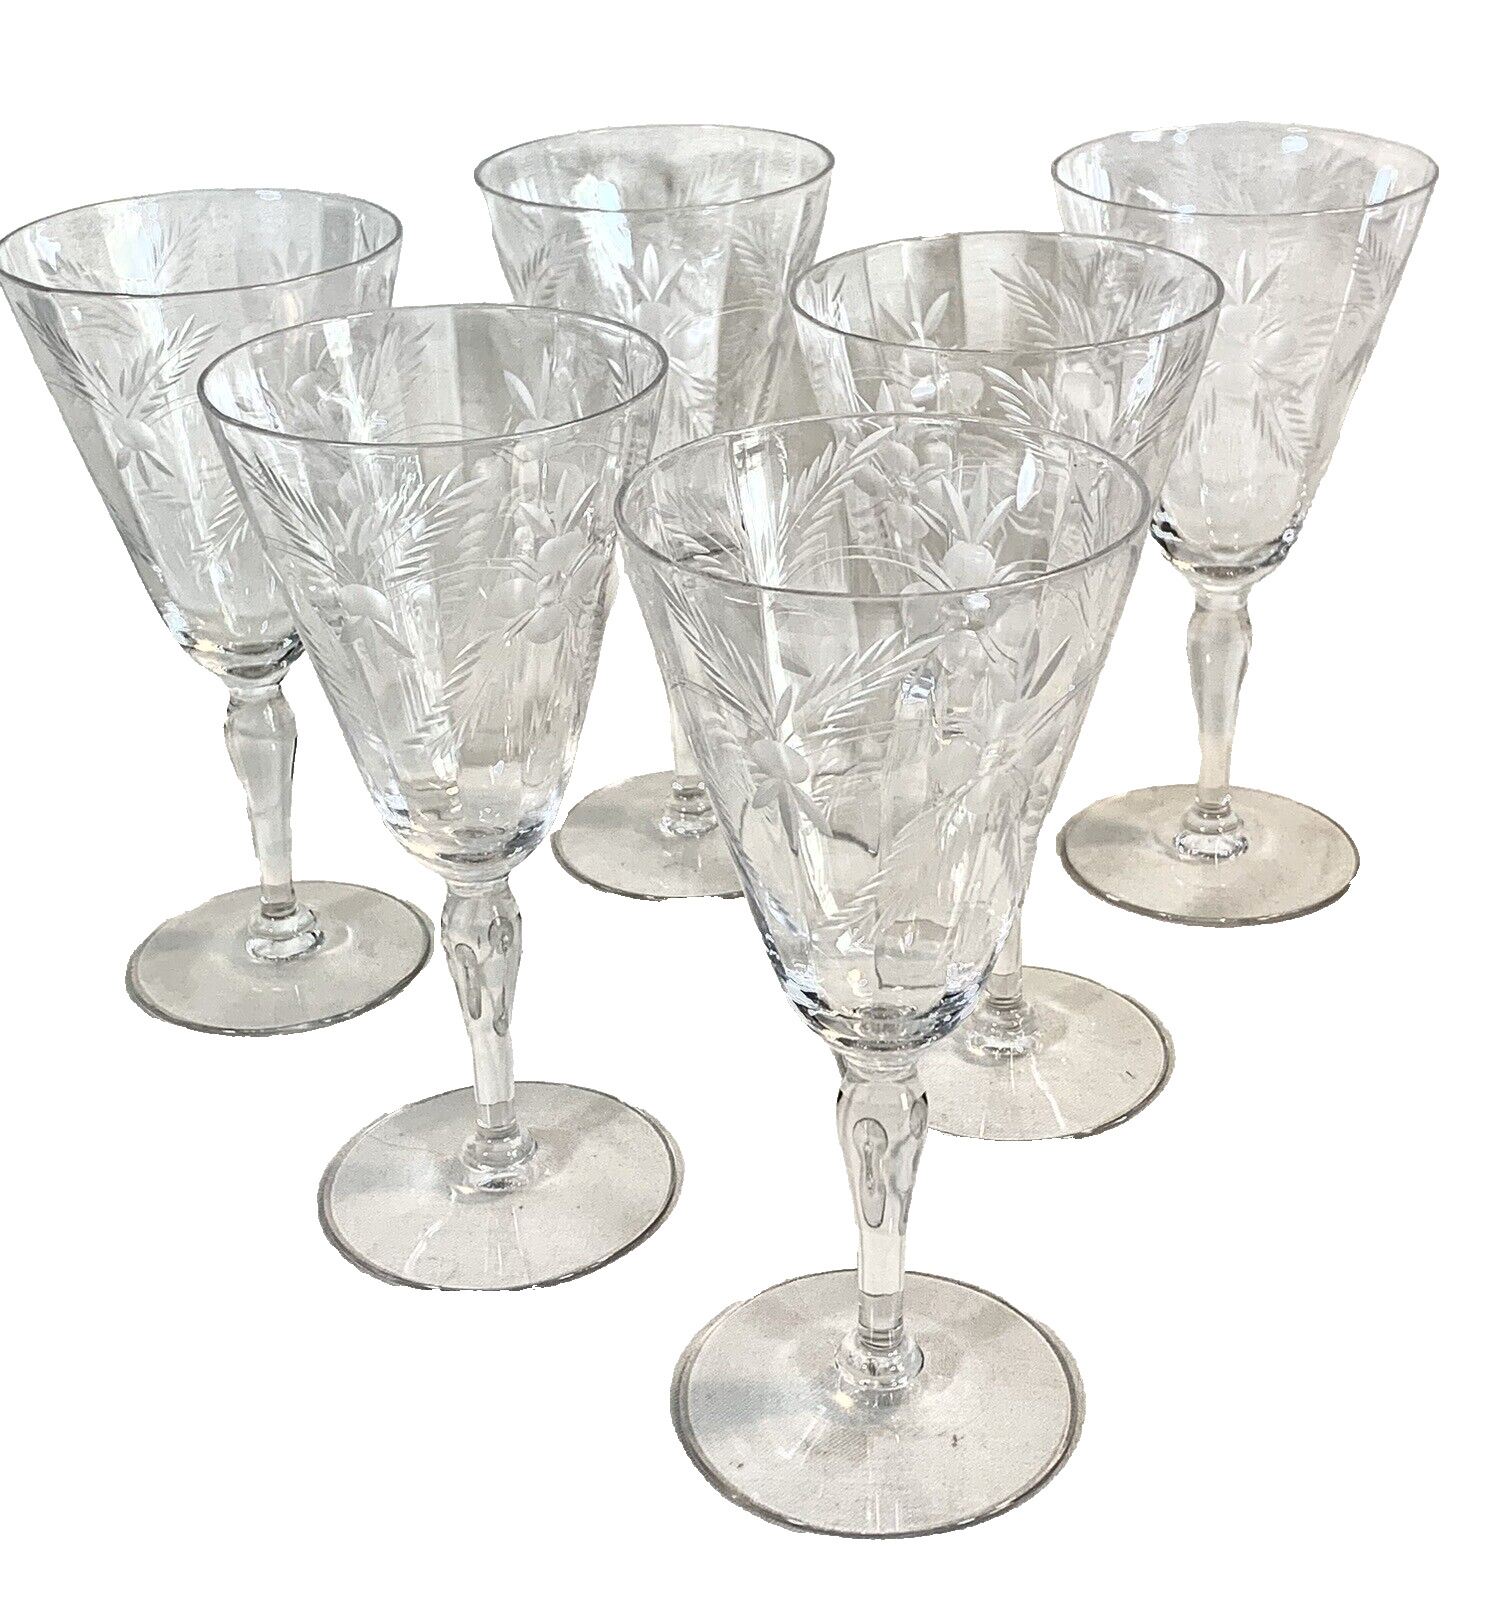 Vintage water goblets 50s crystal optic bowl etched flowers leaves clear color